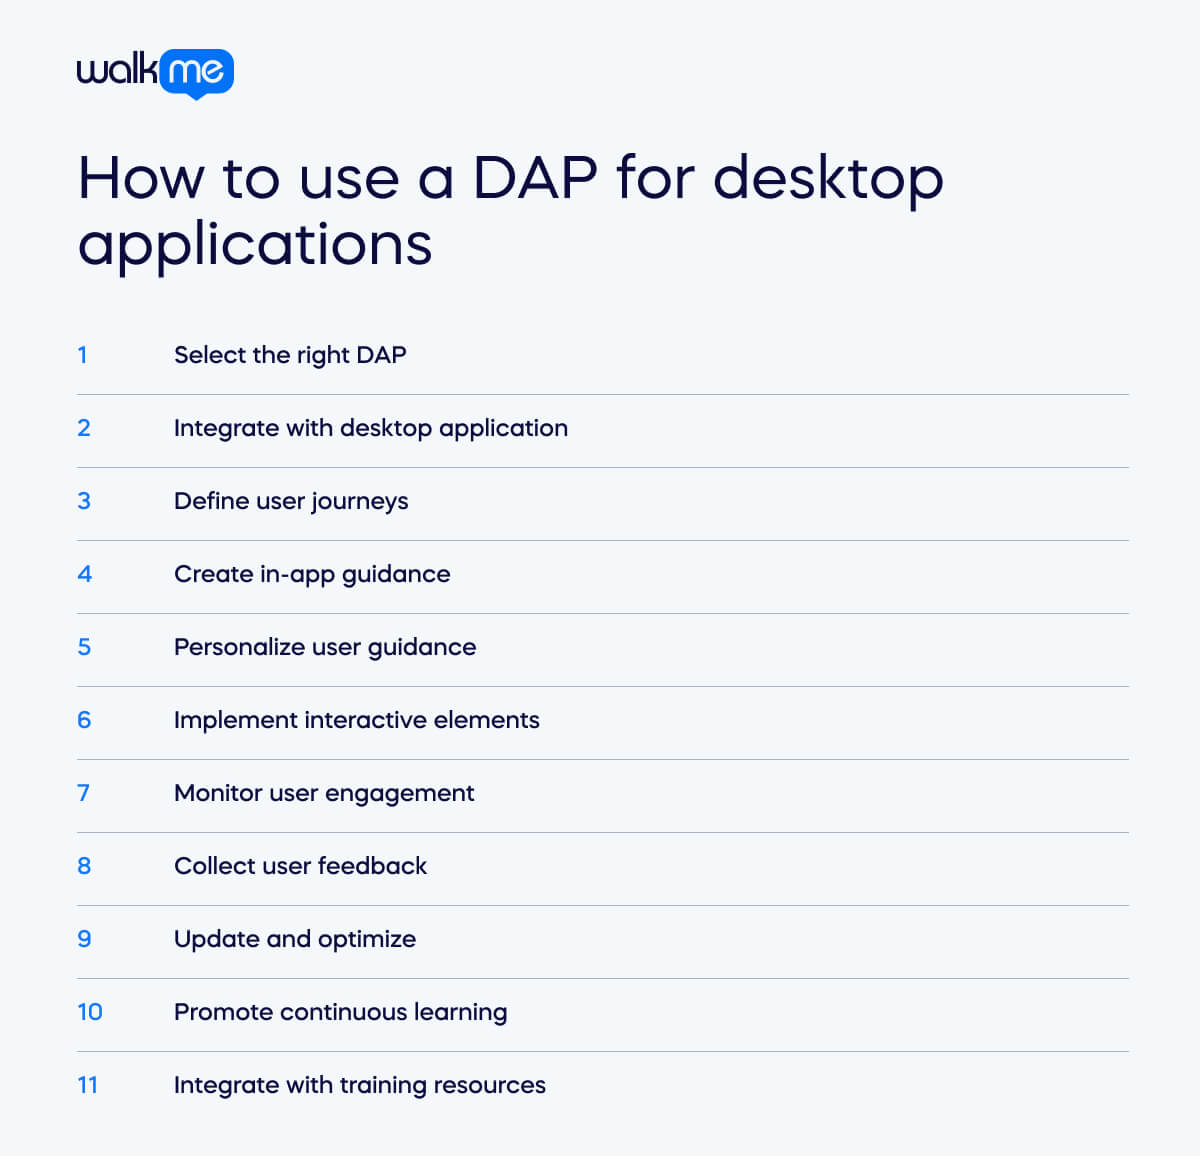 How to use a DAP for desktop applications (1)